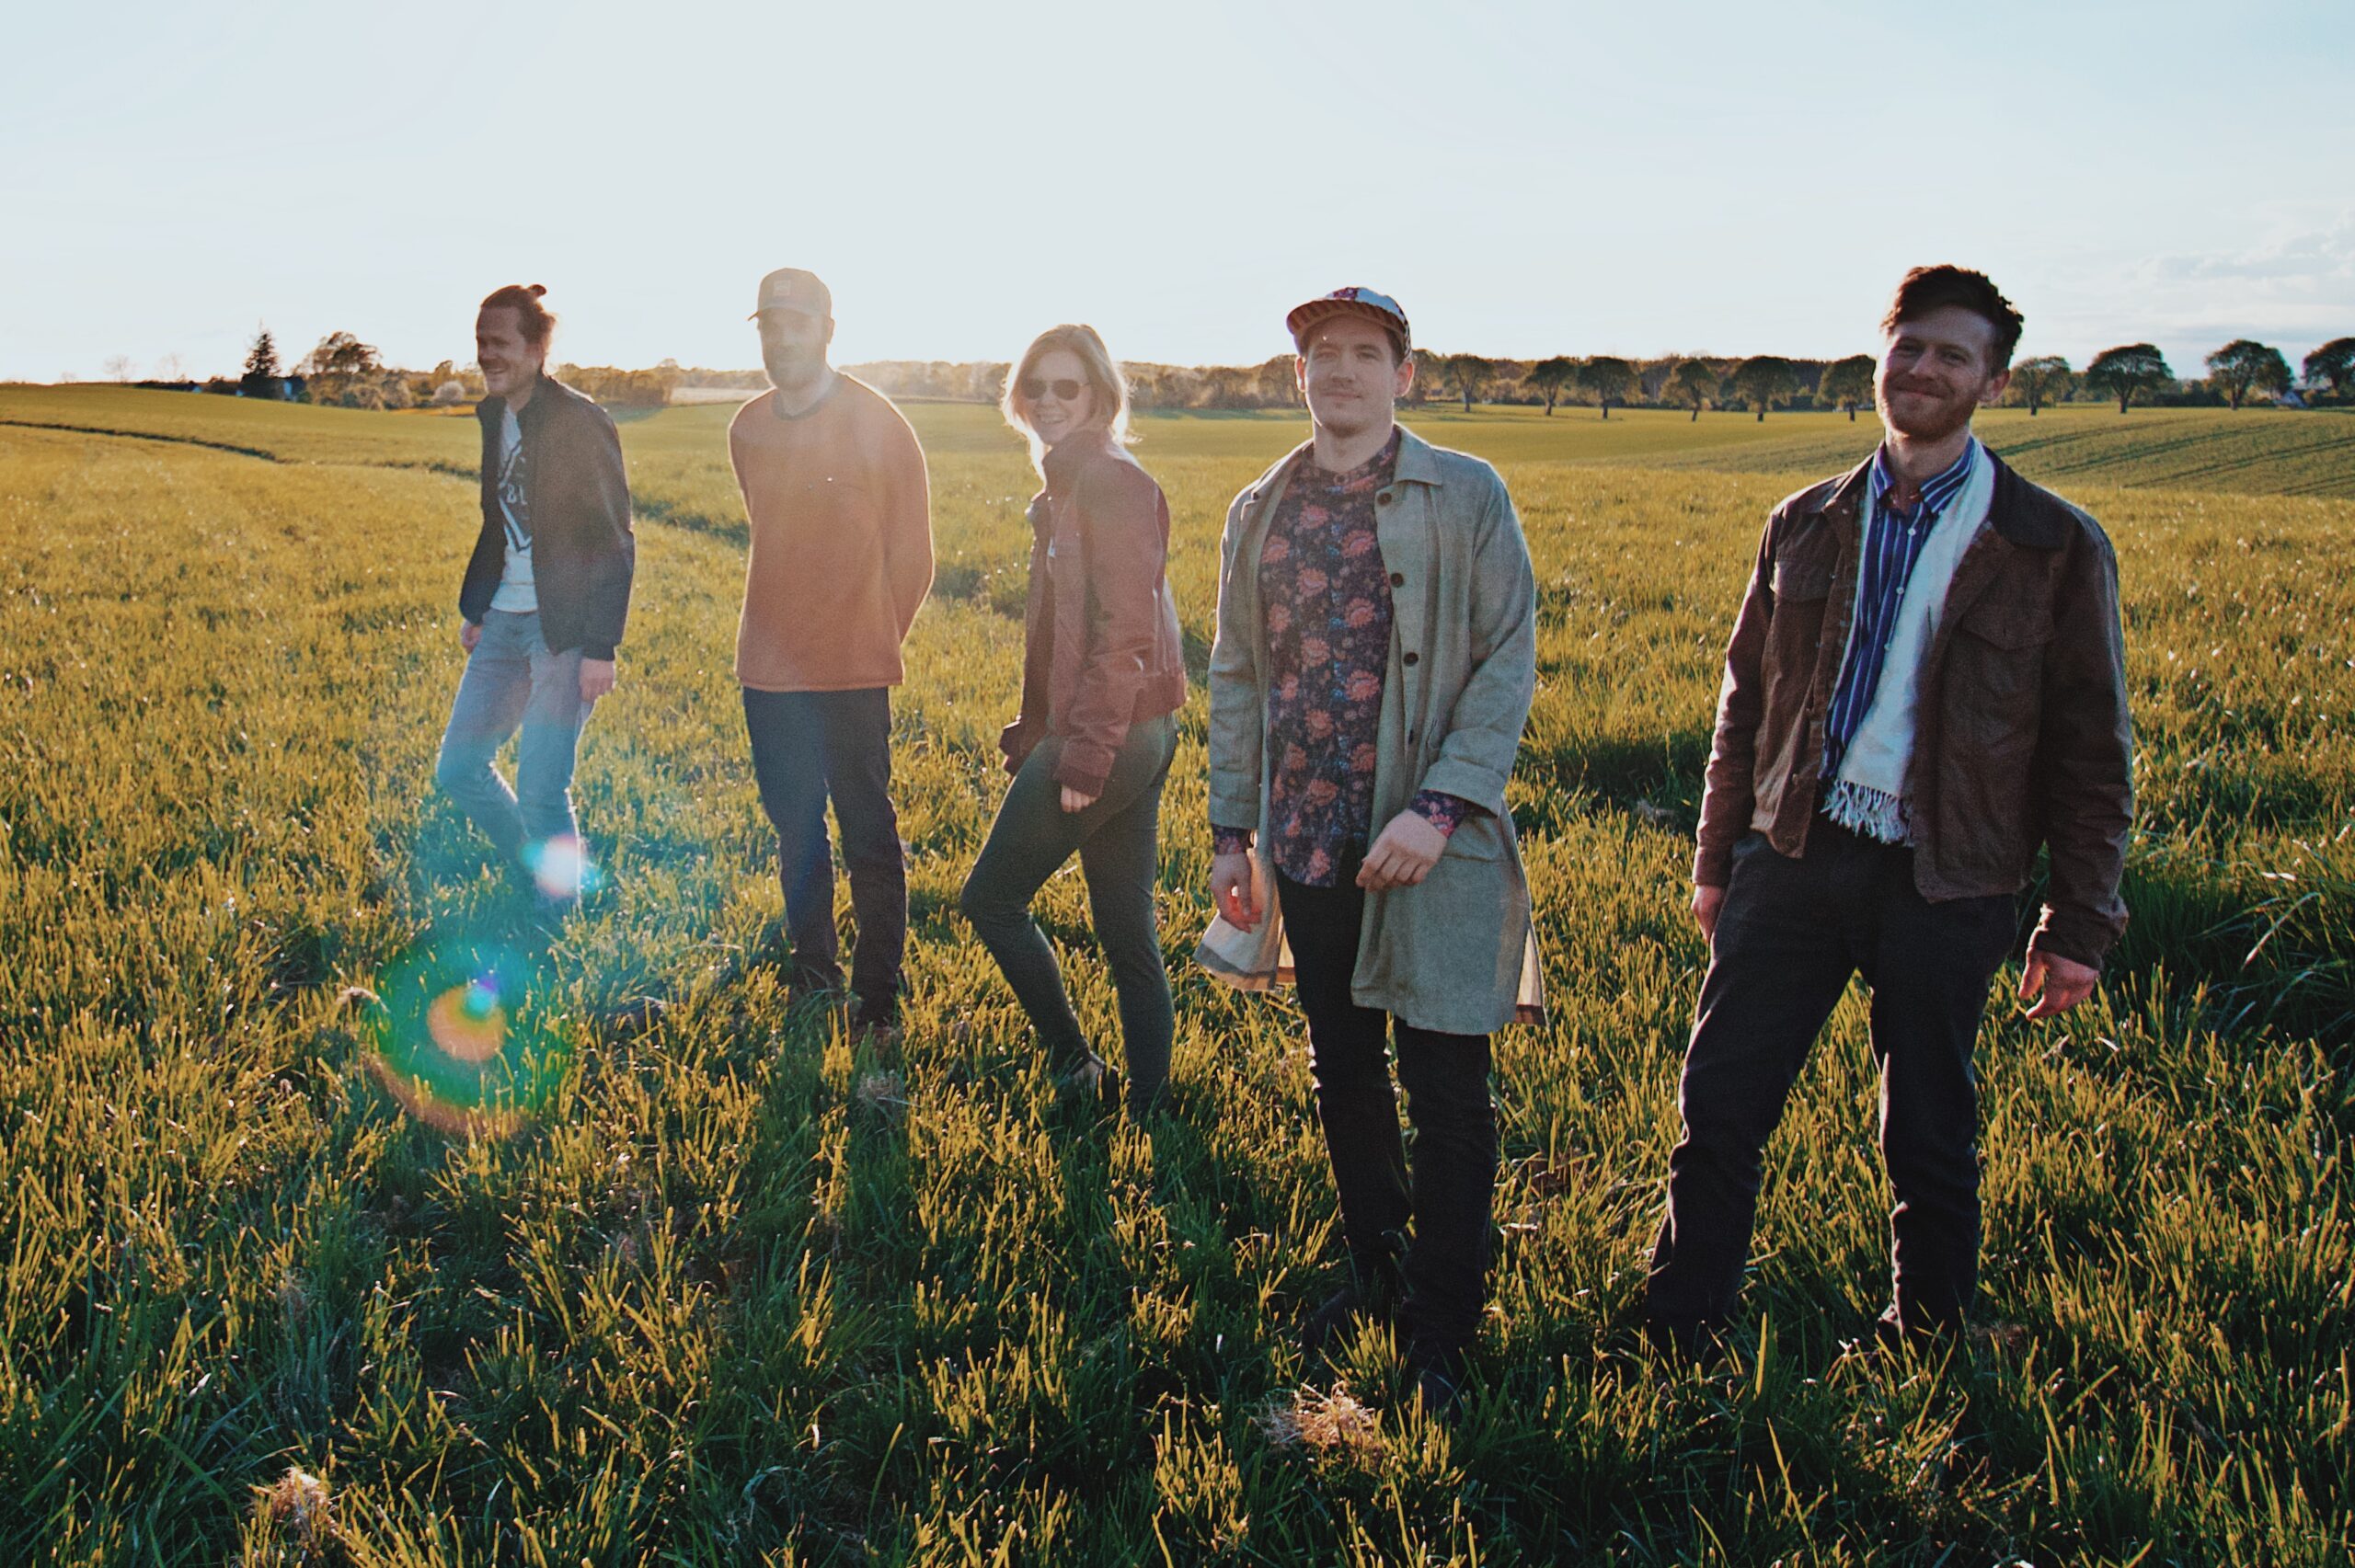 The five band members of Wild Forest stand in a grass field on a sunny day.